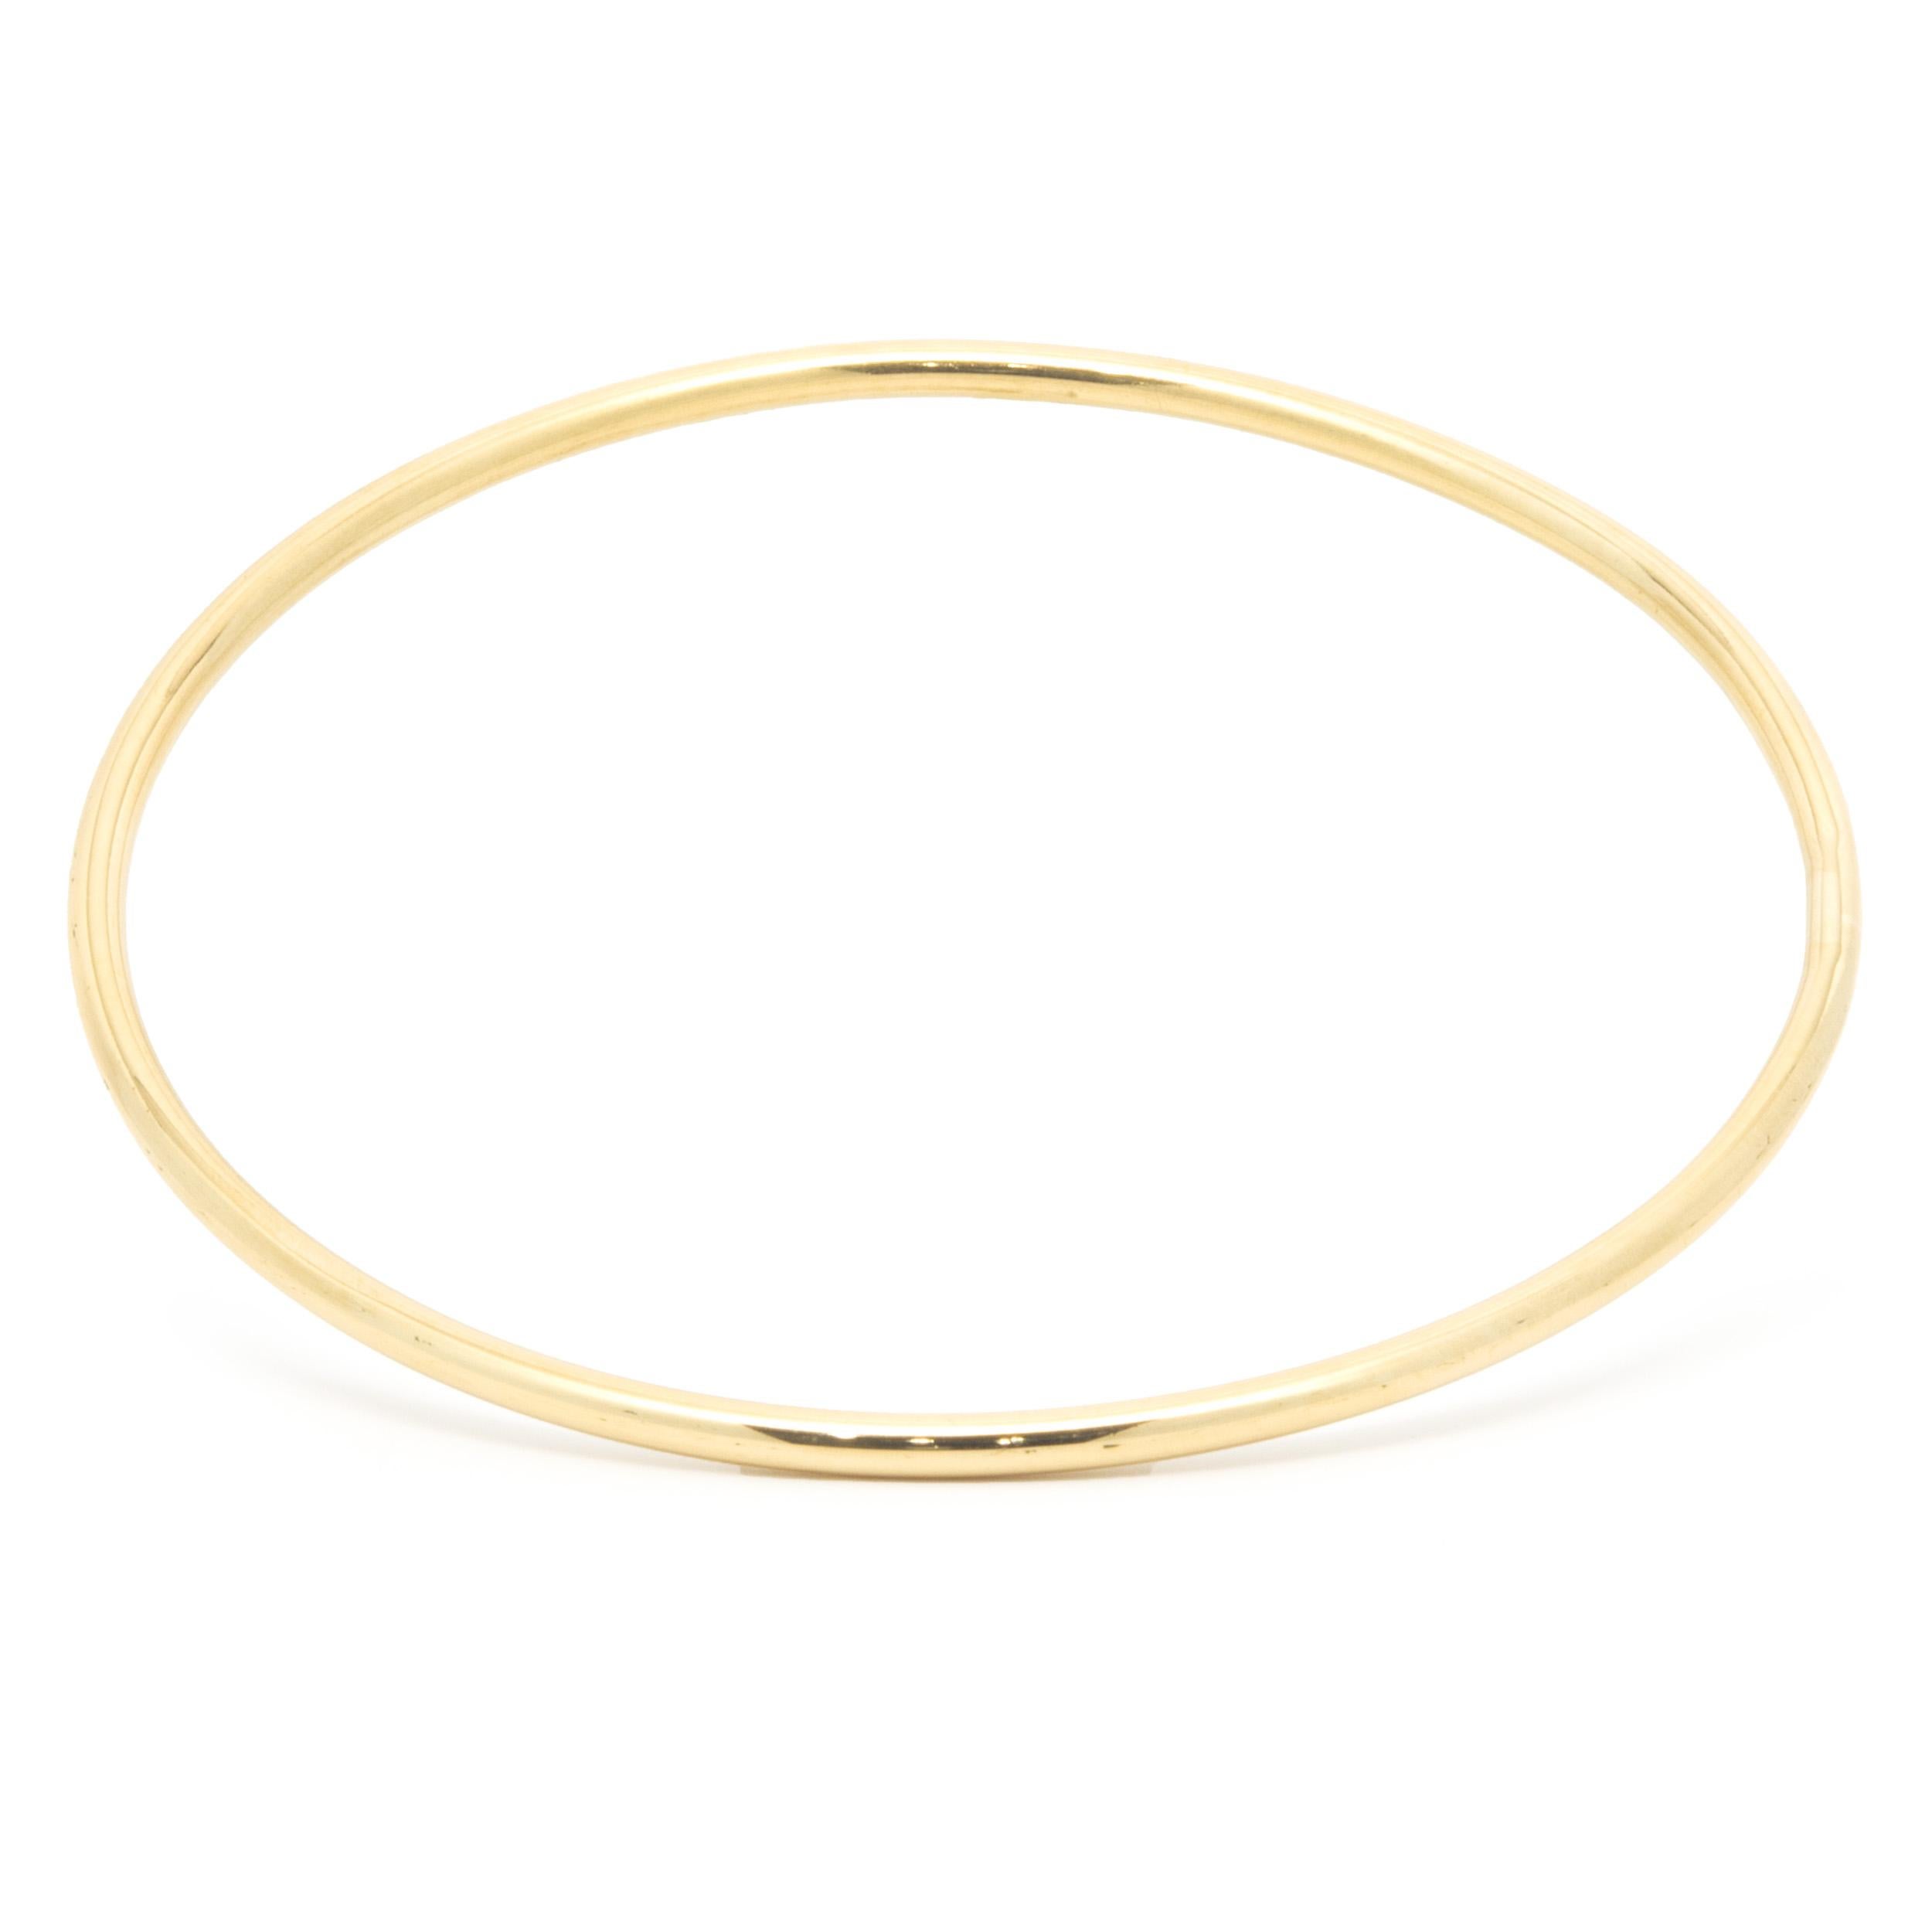 Material: 18K yellow gold
Dimensions: bracelet will fit up to a 7-inch wrist
Weight: 14.77 grams